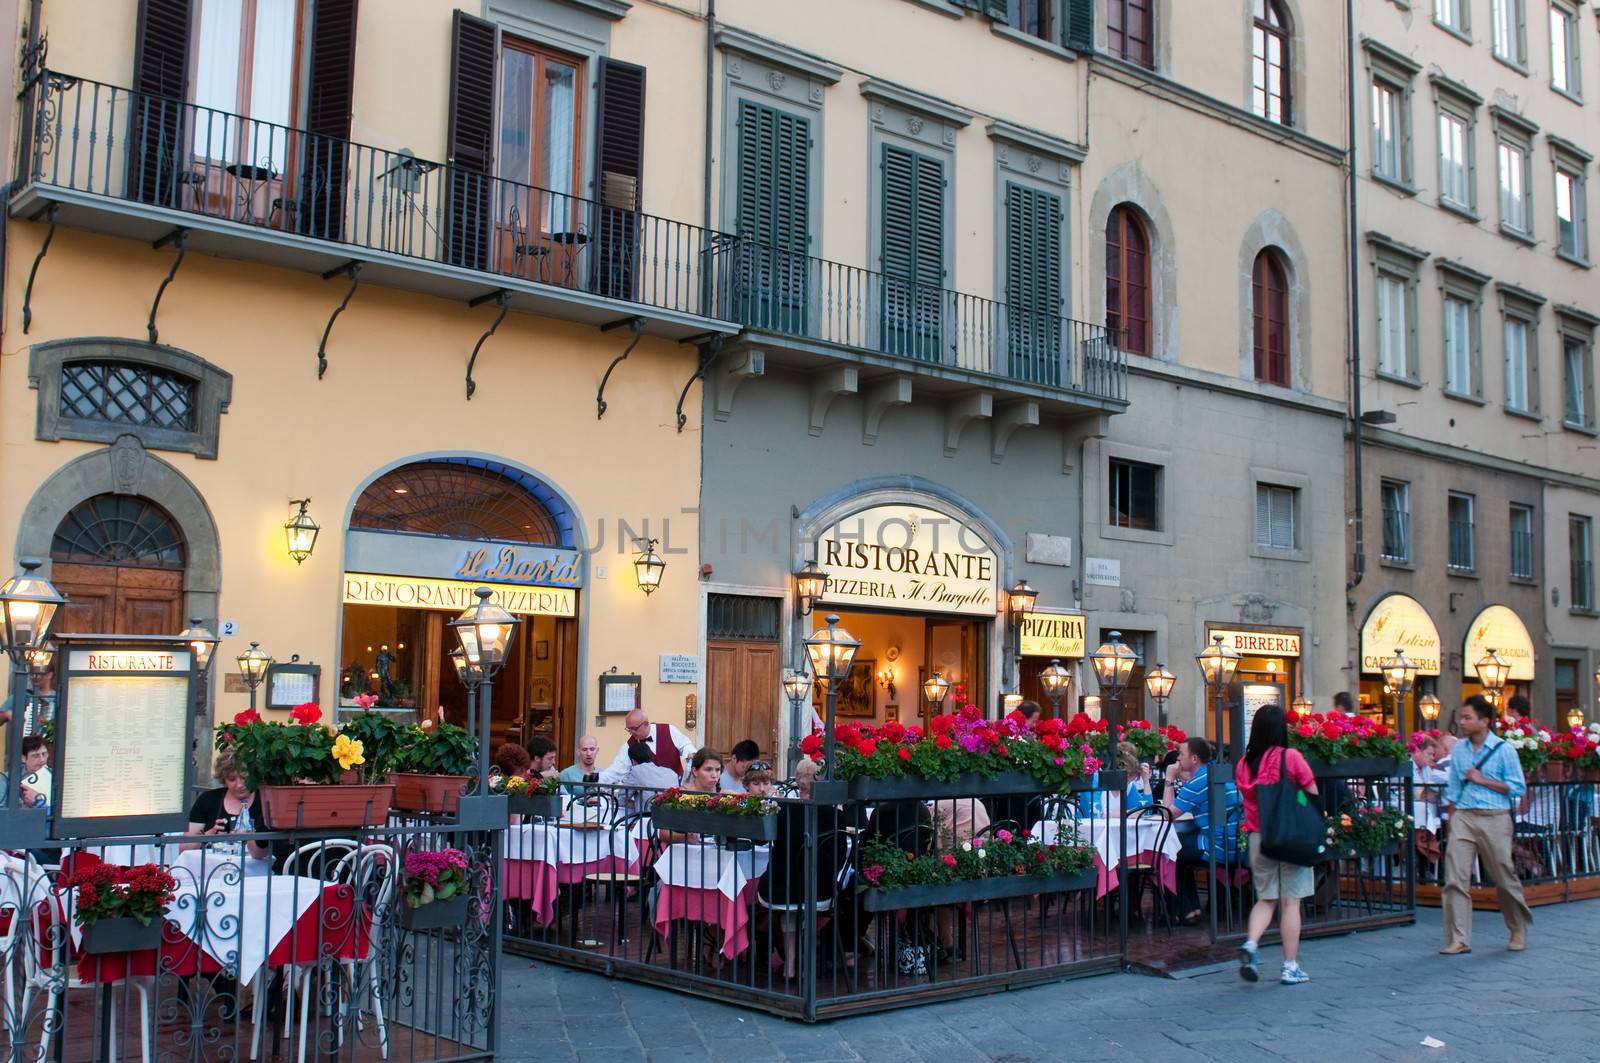 Street restaurants on Piazza della Signoria at evening. Florence, Tuscany, Italy.